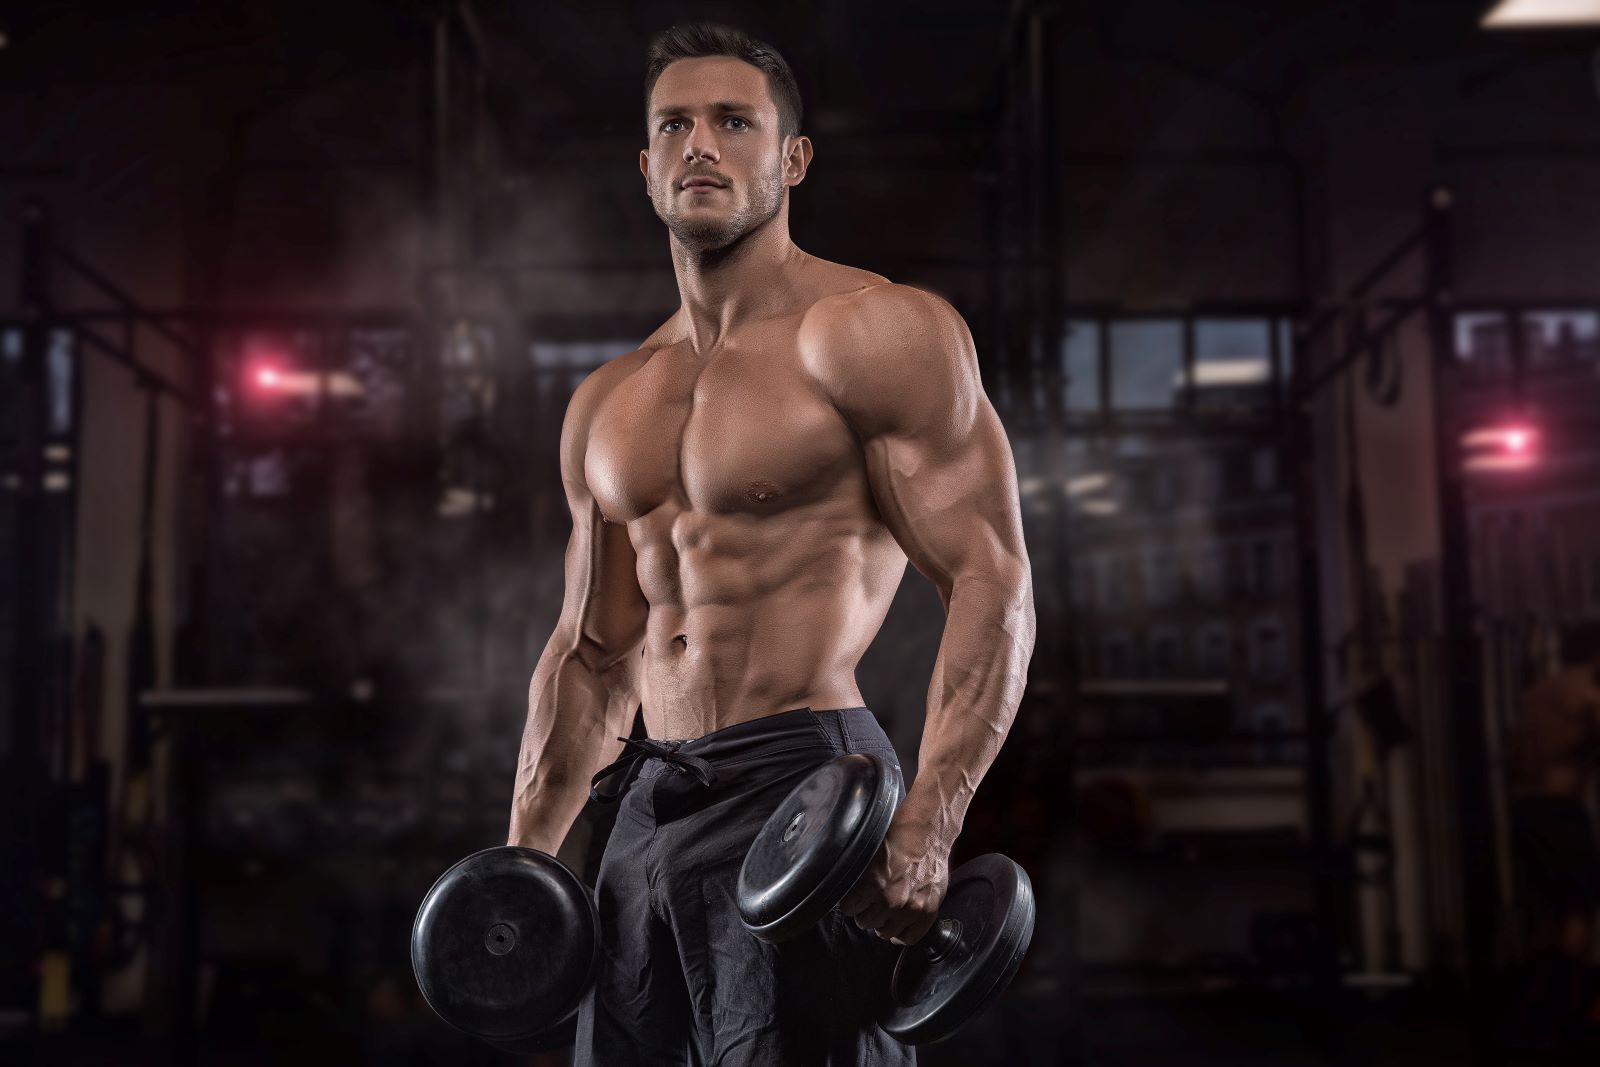 The Diet This Bodybuilder Used to Build 15 Pounds of Muscle